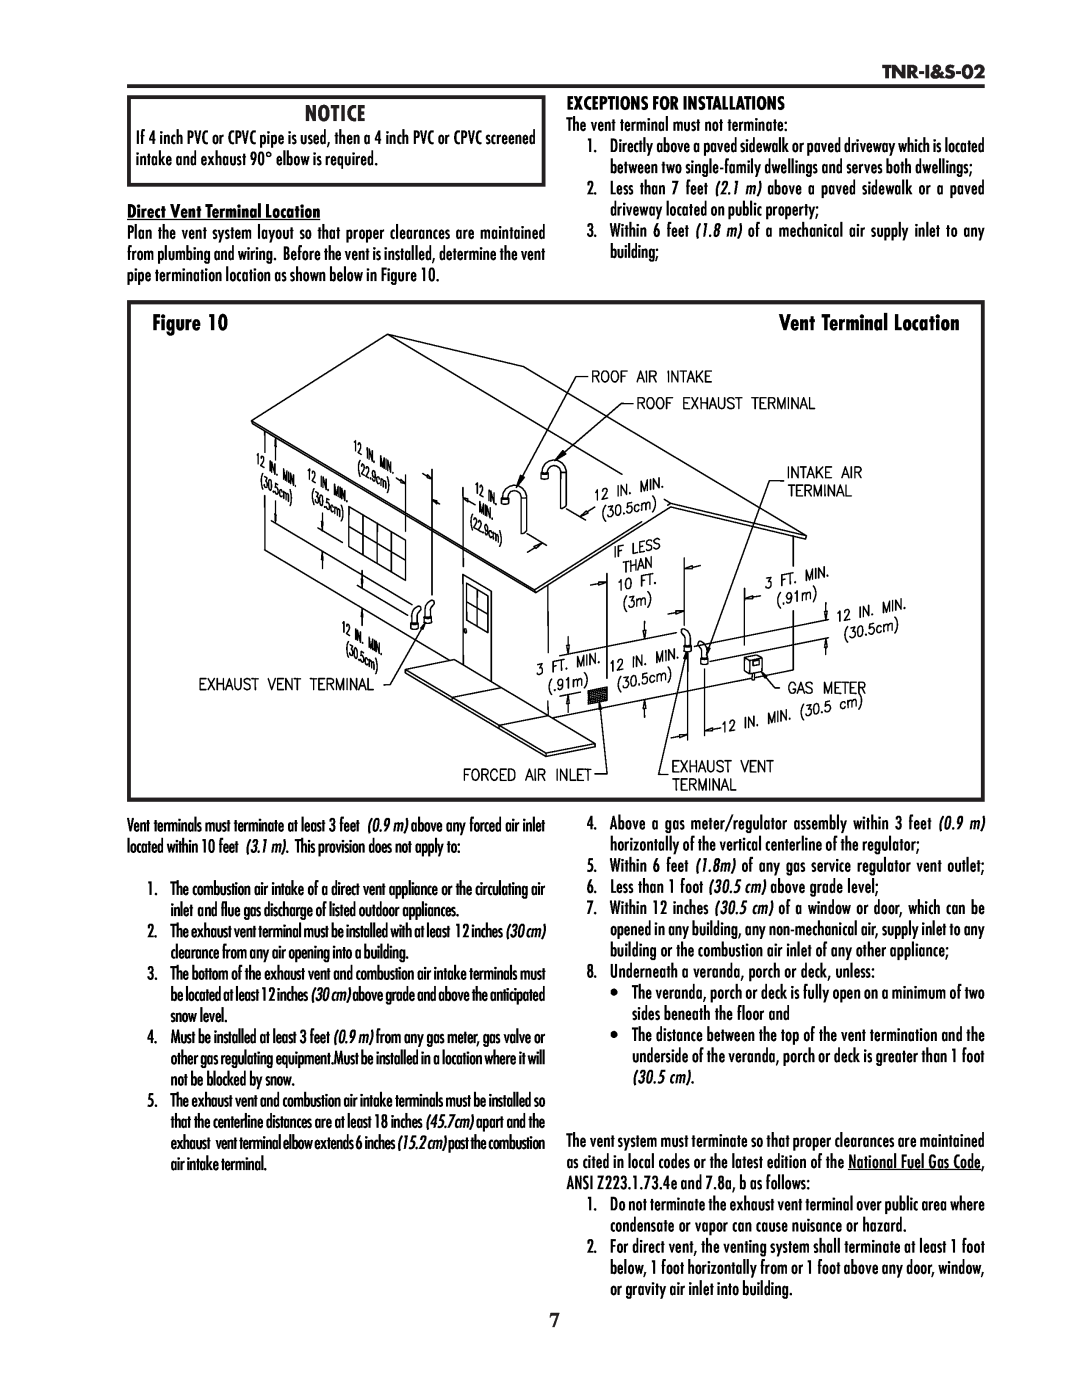 Lochinvar TNR-I&S-02 service manual Direct Vent Terminal Location, Exceptions For Installations 